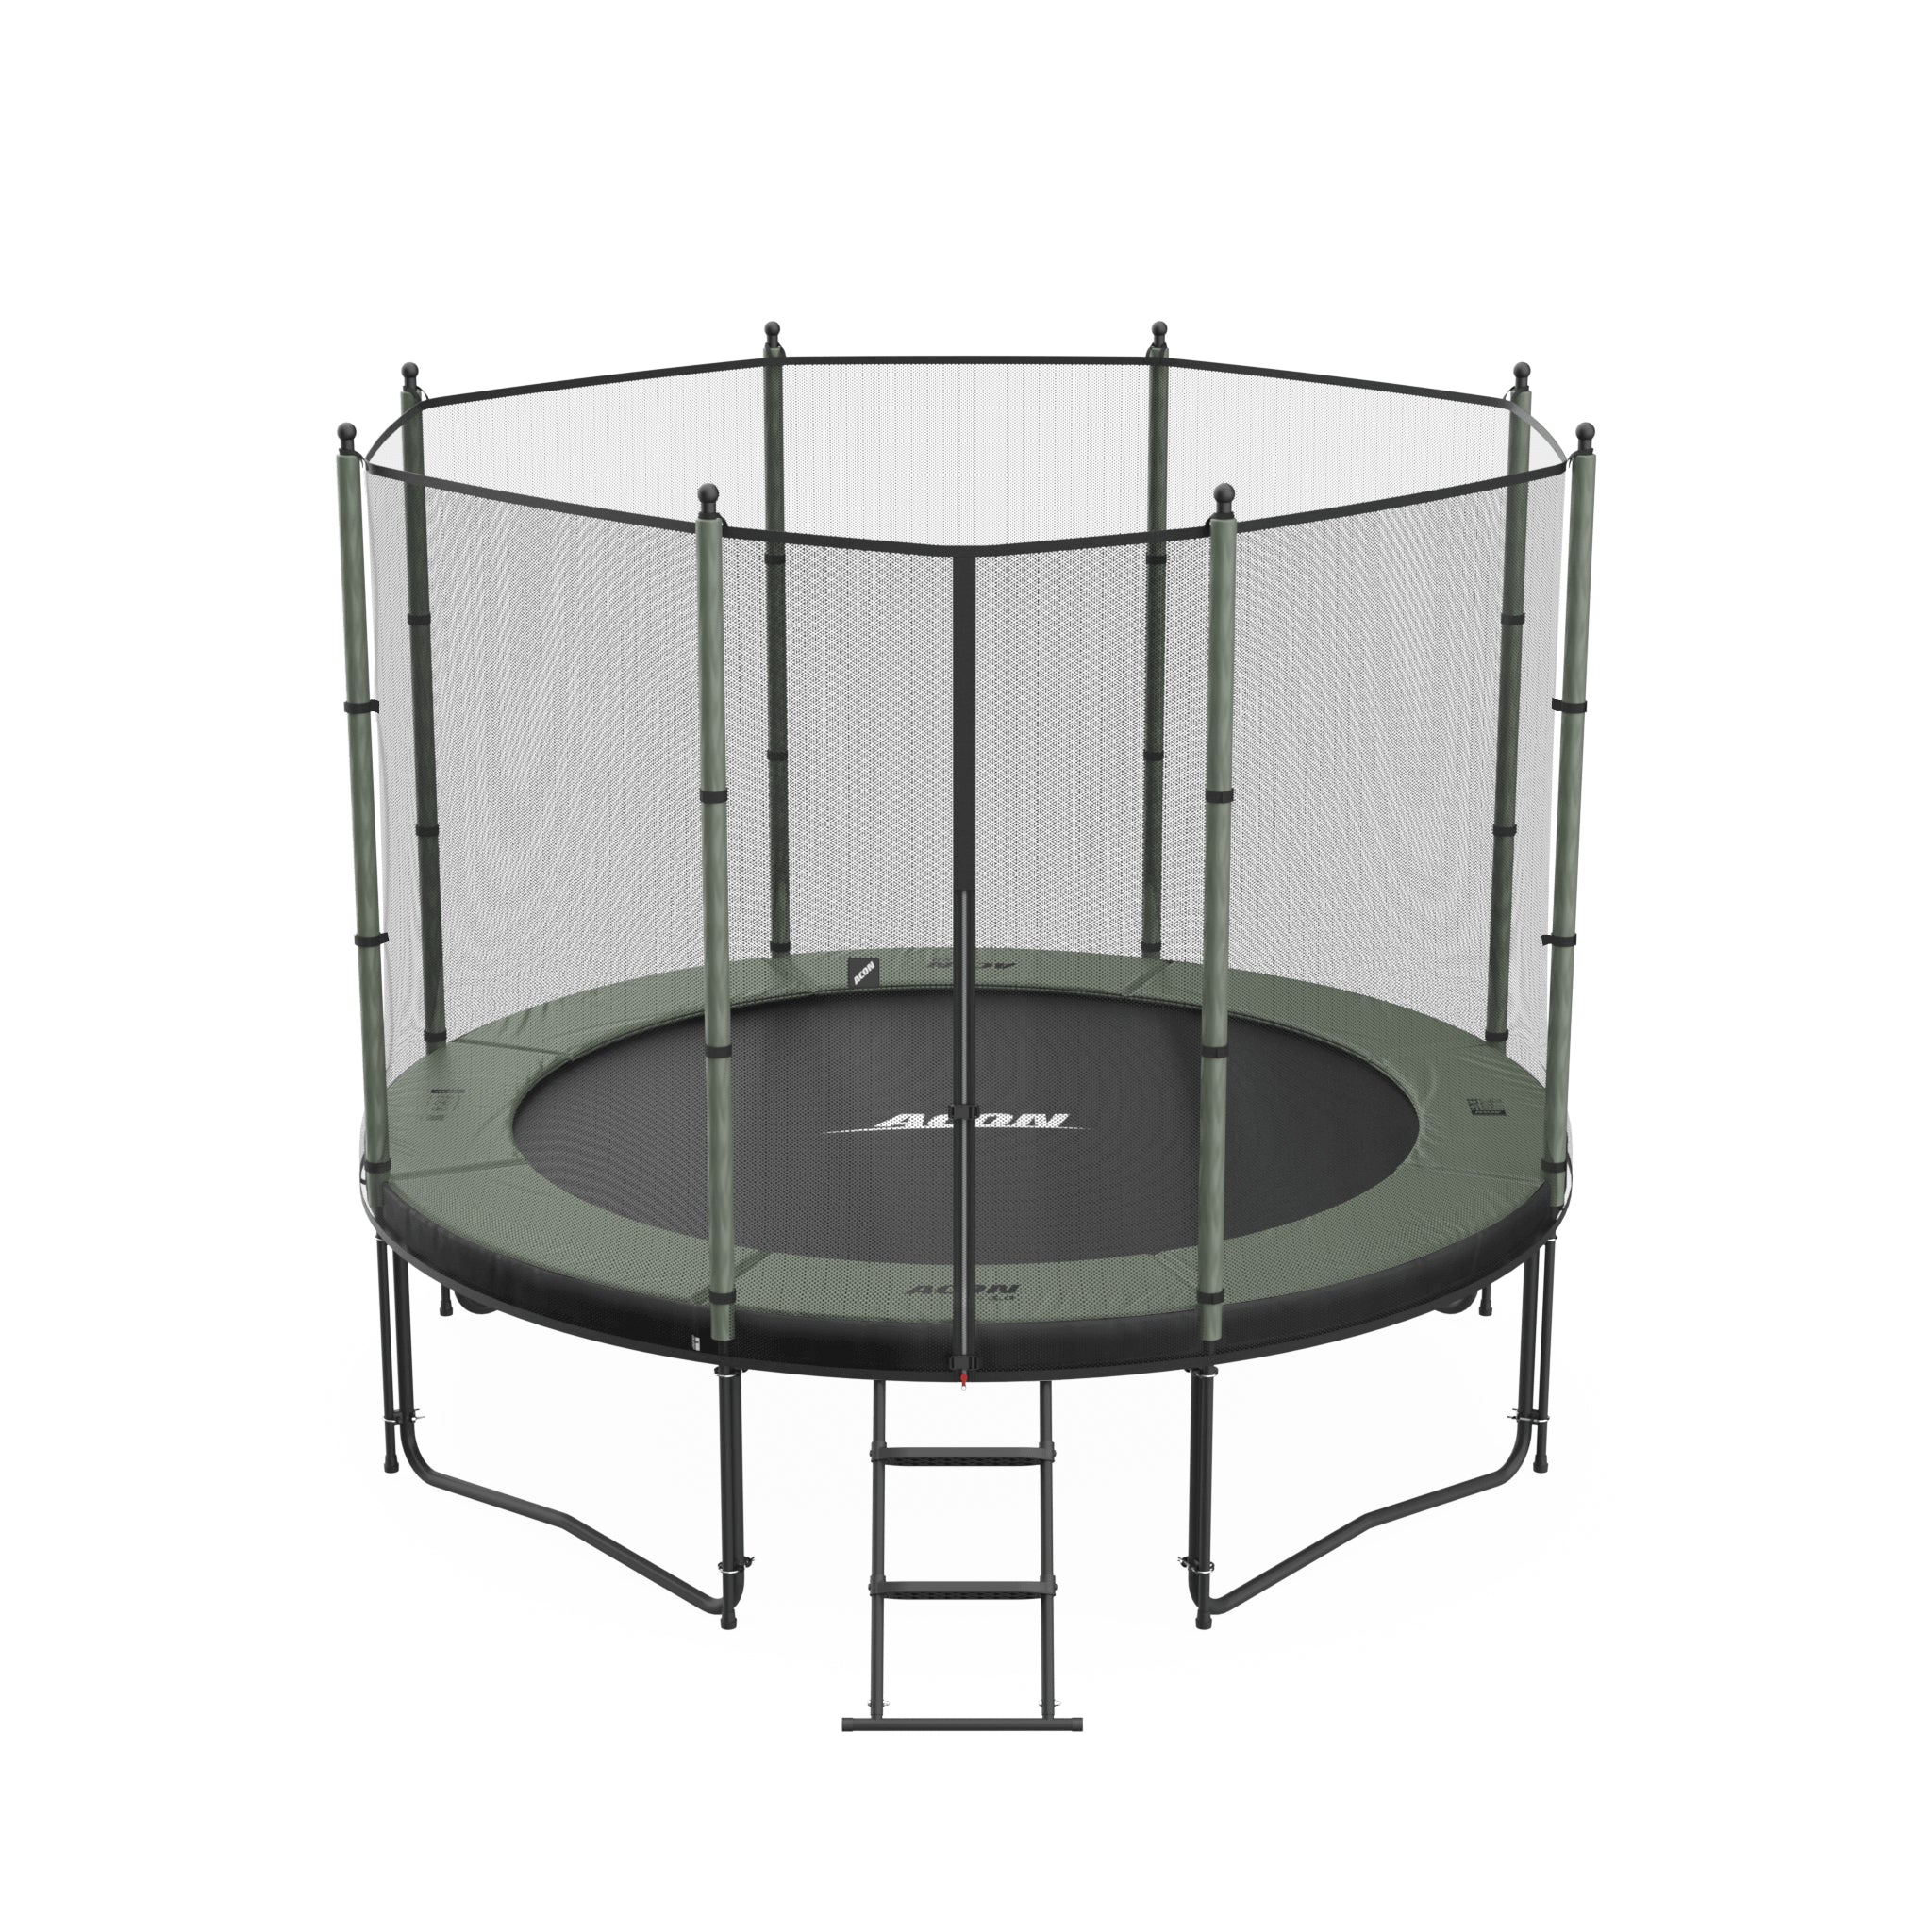 ACON Air 3,0m Trampoline with Standard Enclosure and ladder.